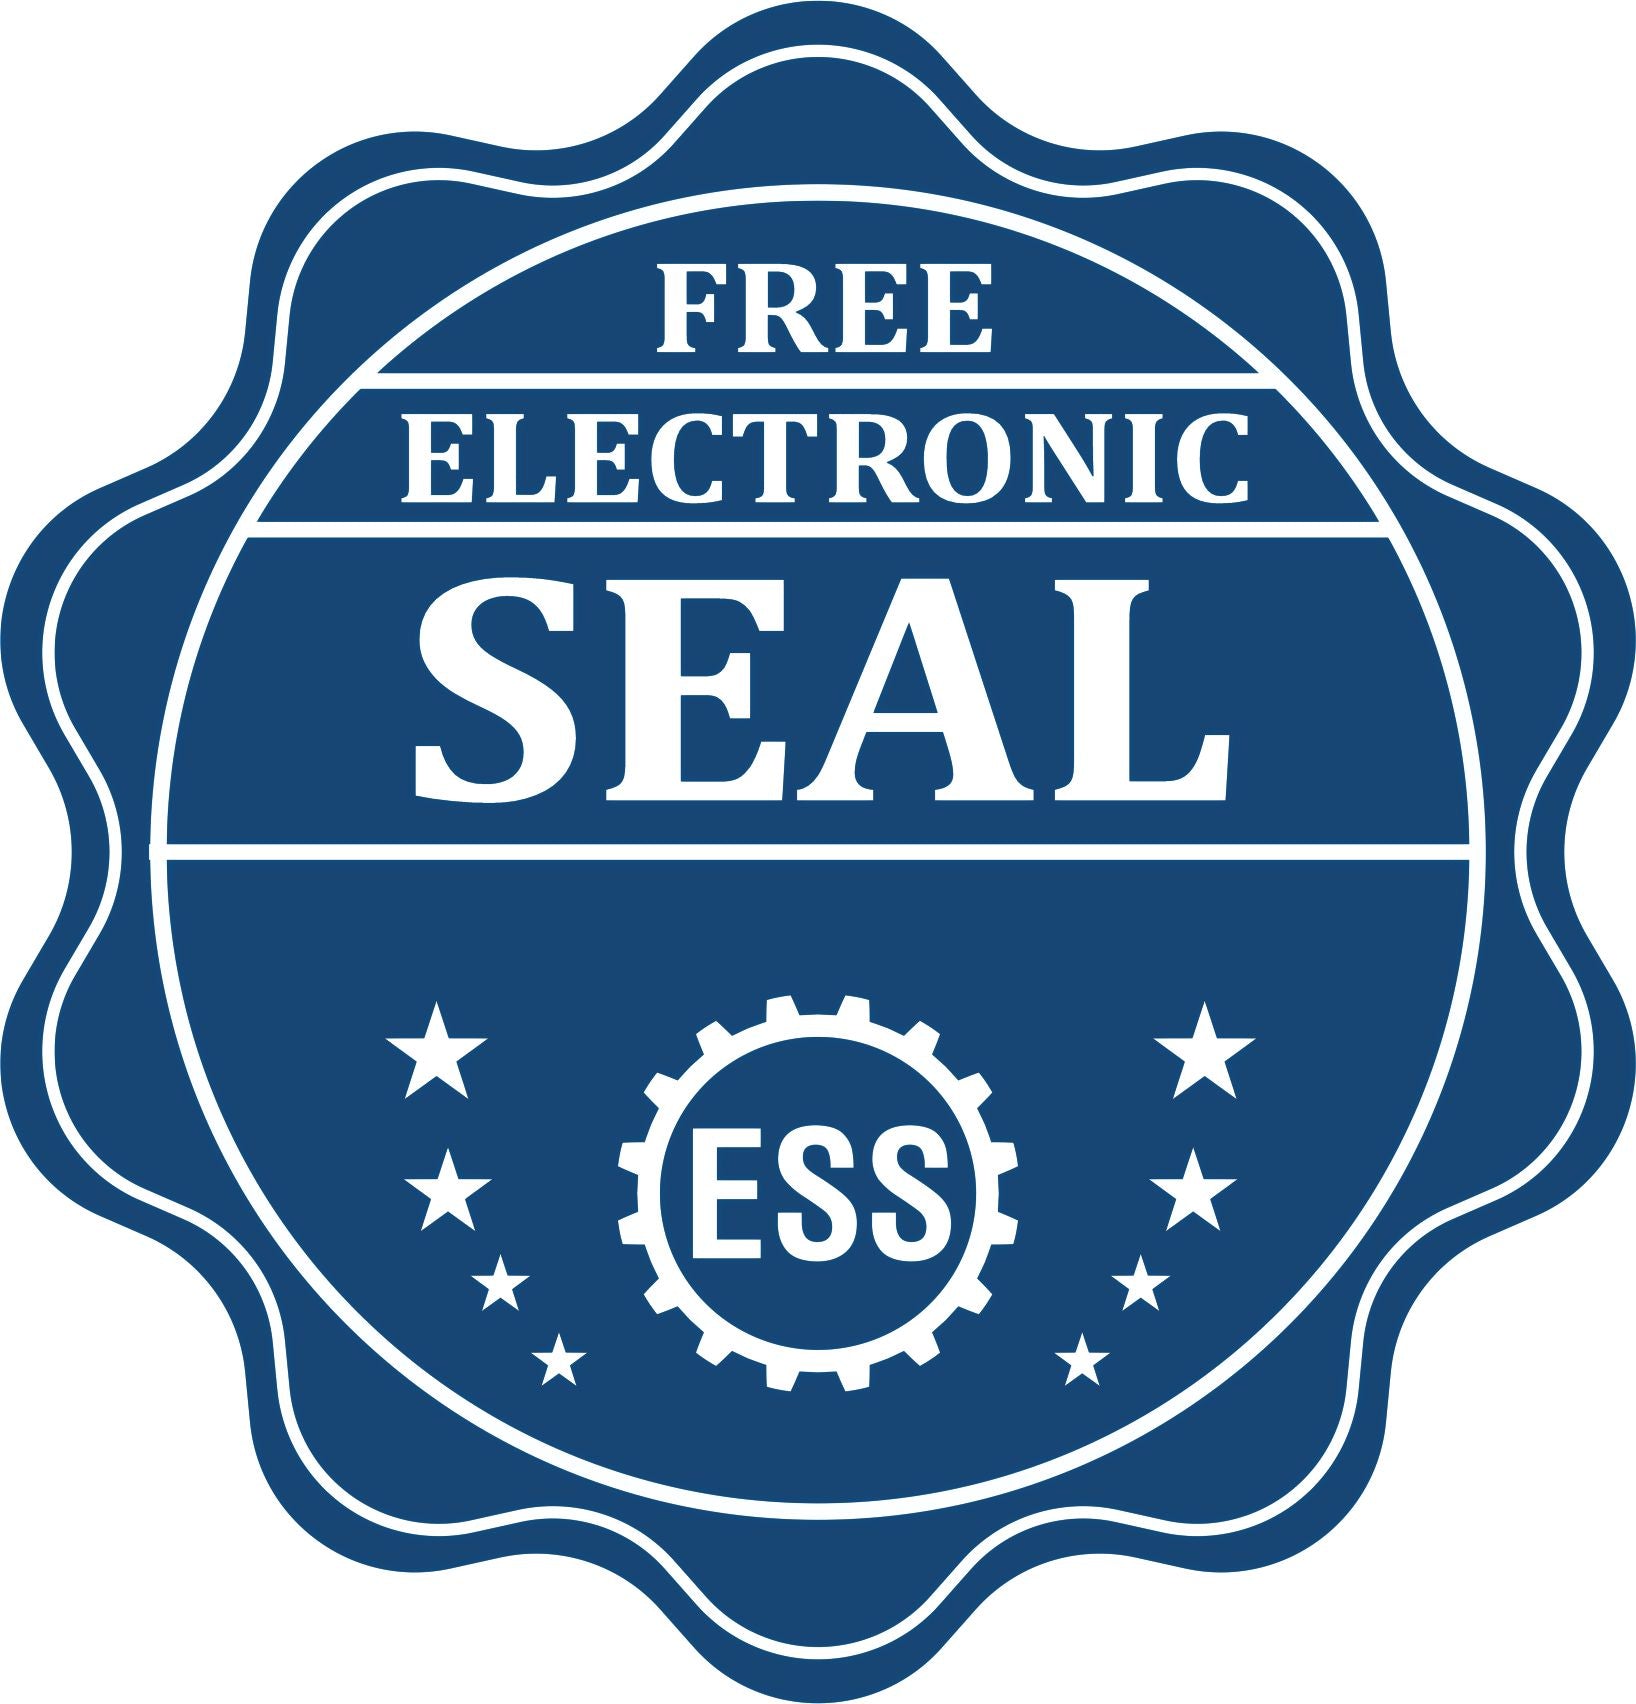 A badge showing a free electronic seal for the Gift Idaho Land Surveyor Seal with stars and the ESS gear on the emblem.